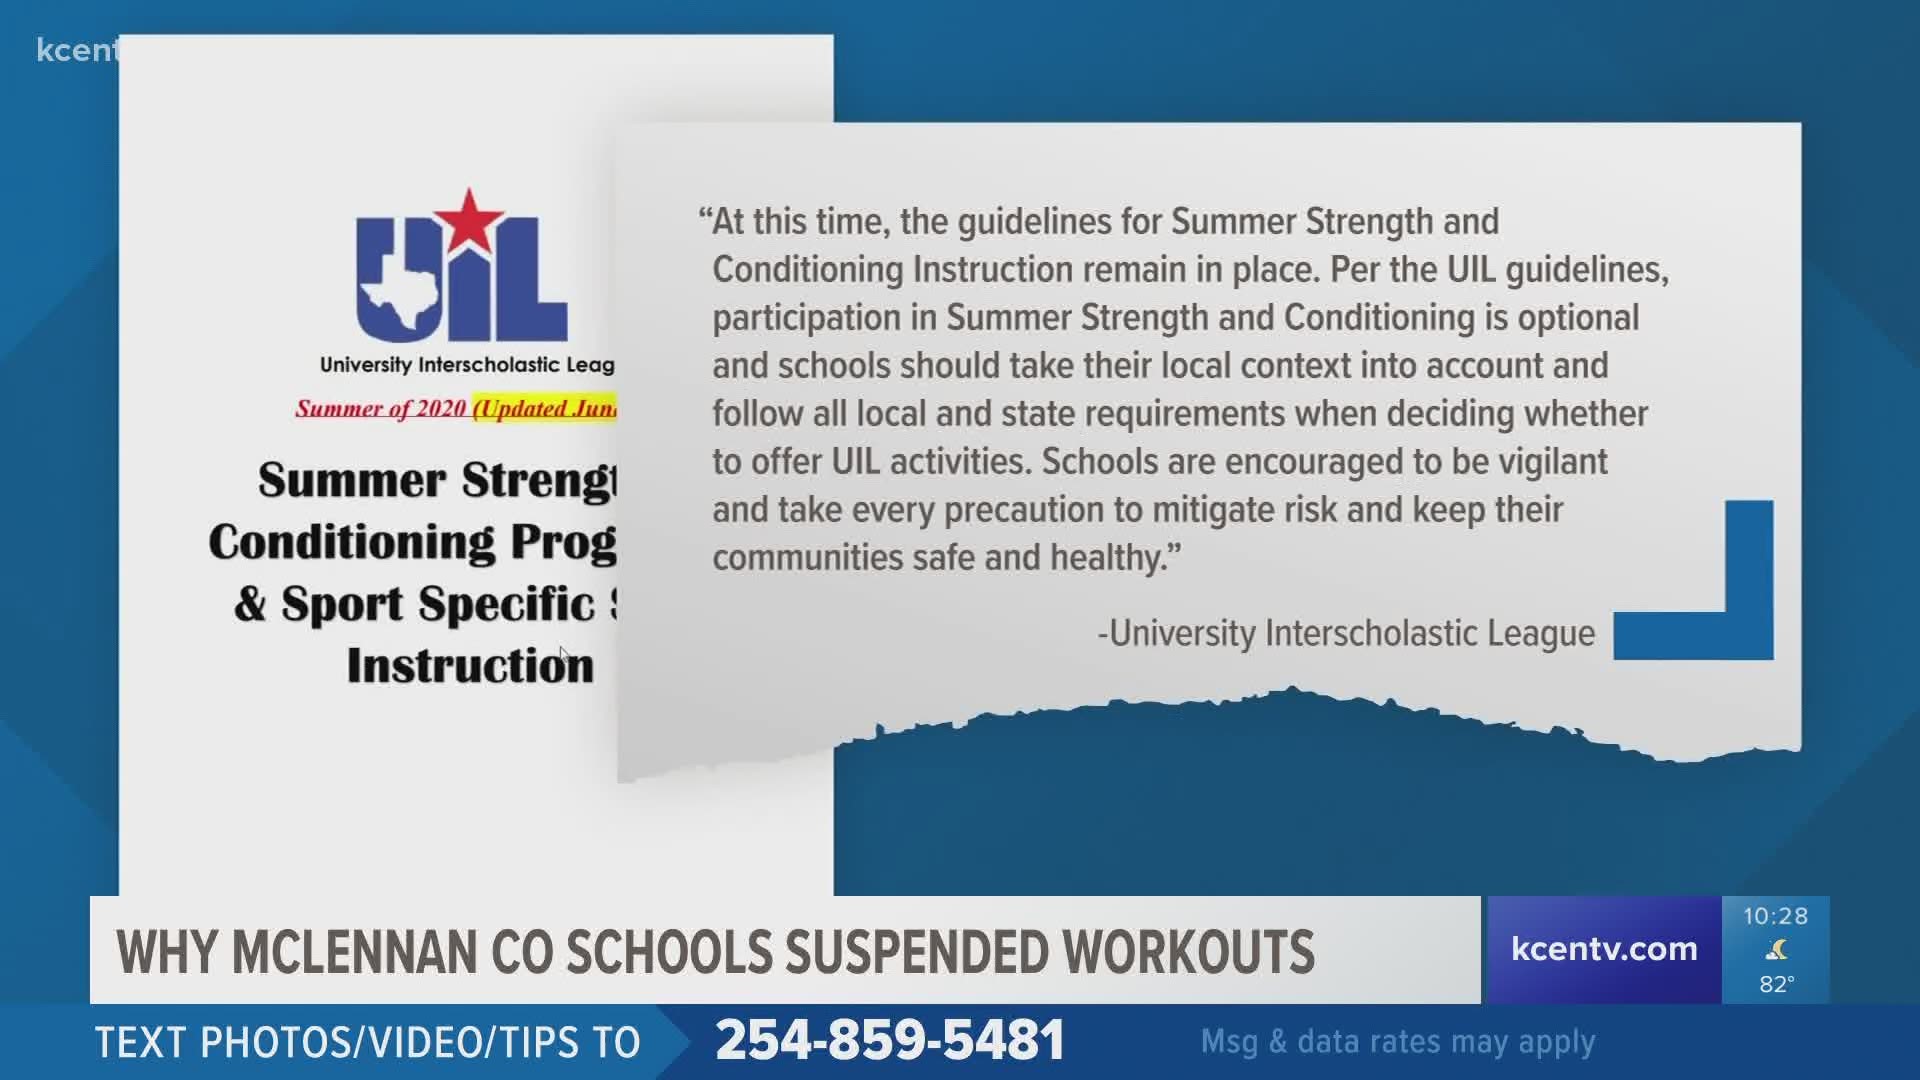 A handful of schools have suspended summer workouts as a precaution against the coronavirus and some say they will resume in mid-July.